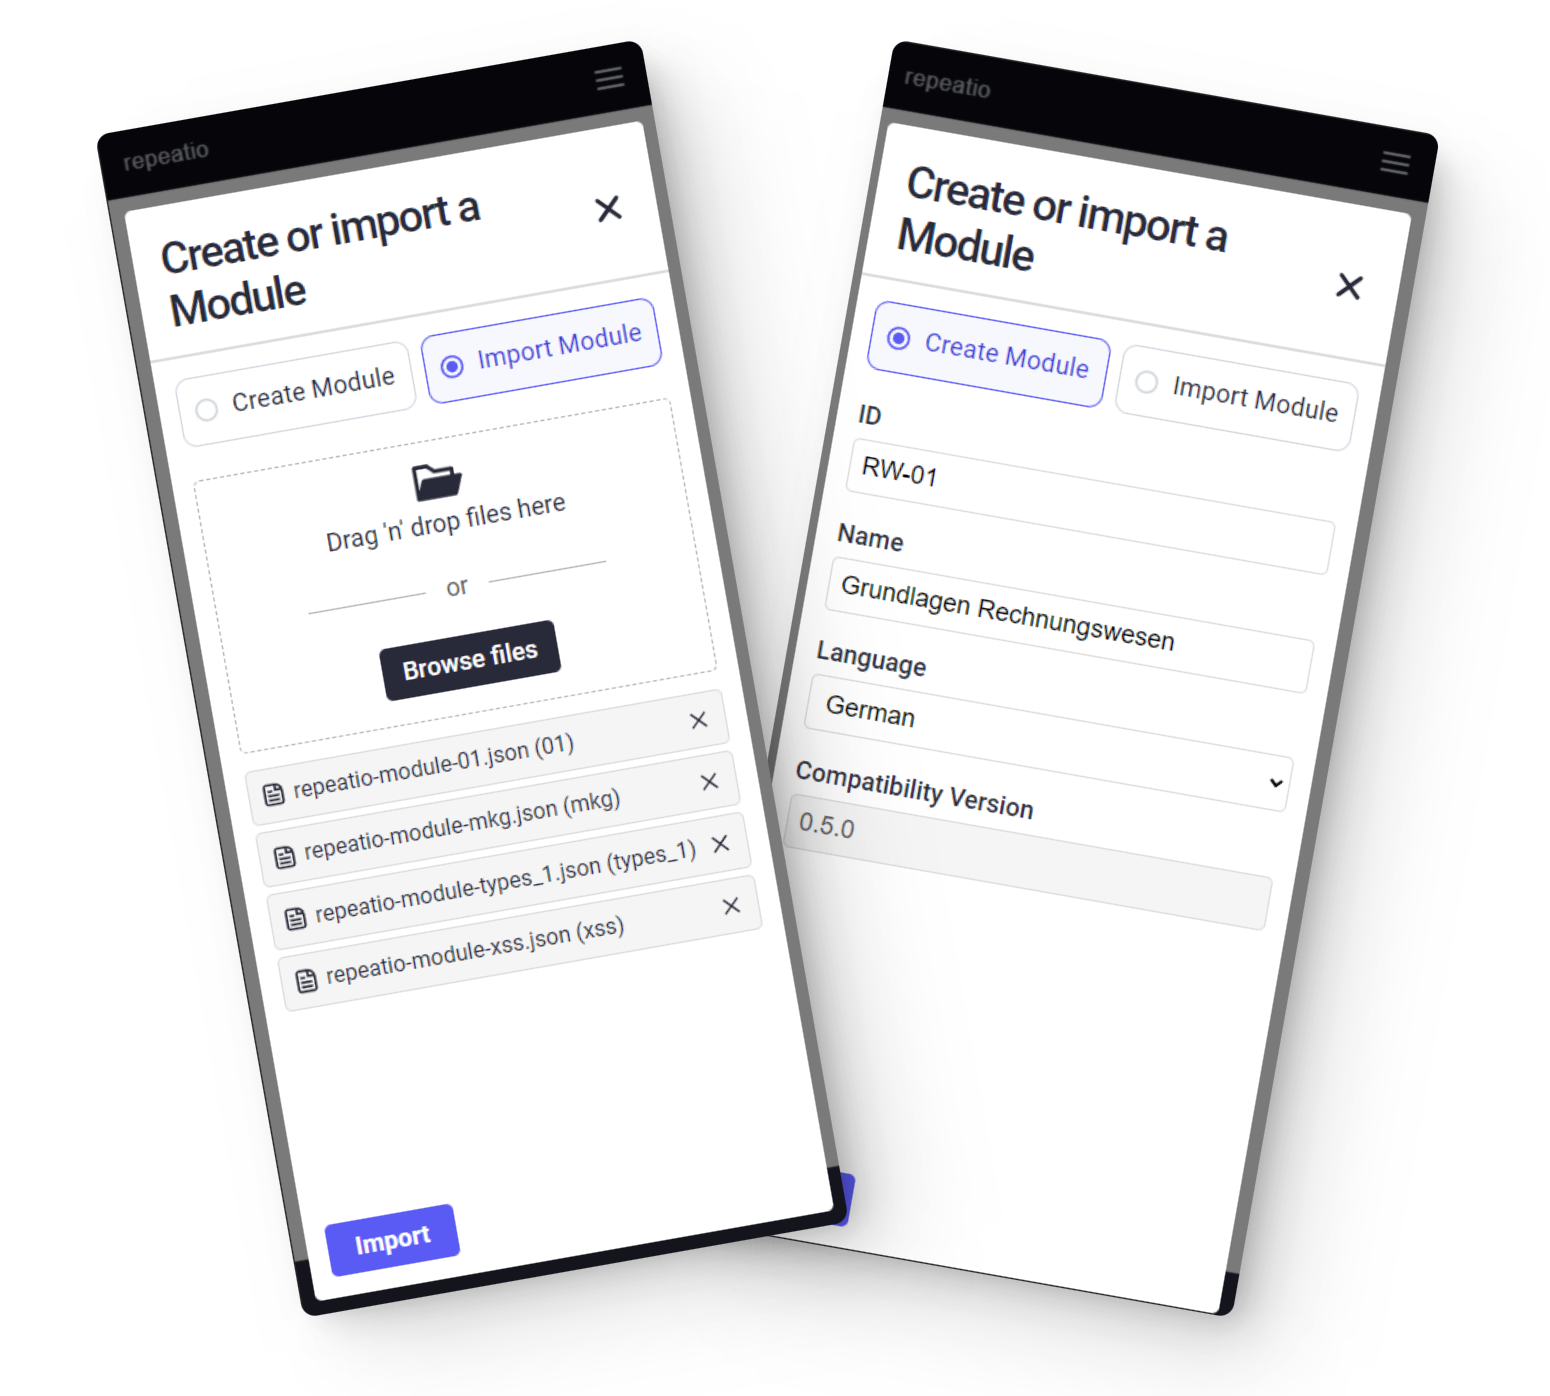 Two mockup of phones with a form titled Create or import a Module. On the left mockup the option 'Import Module' is selected'. The user has imported 4 modules. On the right mockup the option 'Create Module' is selected. The user is filled in the following inputs in the form. ID: RW-01. Name: Grundlagen Rechnungswesen. Language: German. Compatibility Version: 0.5.0 .